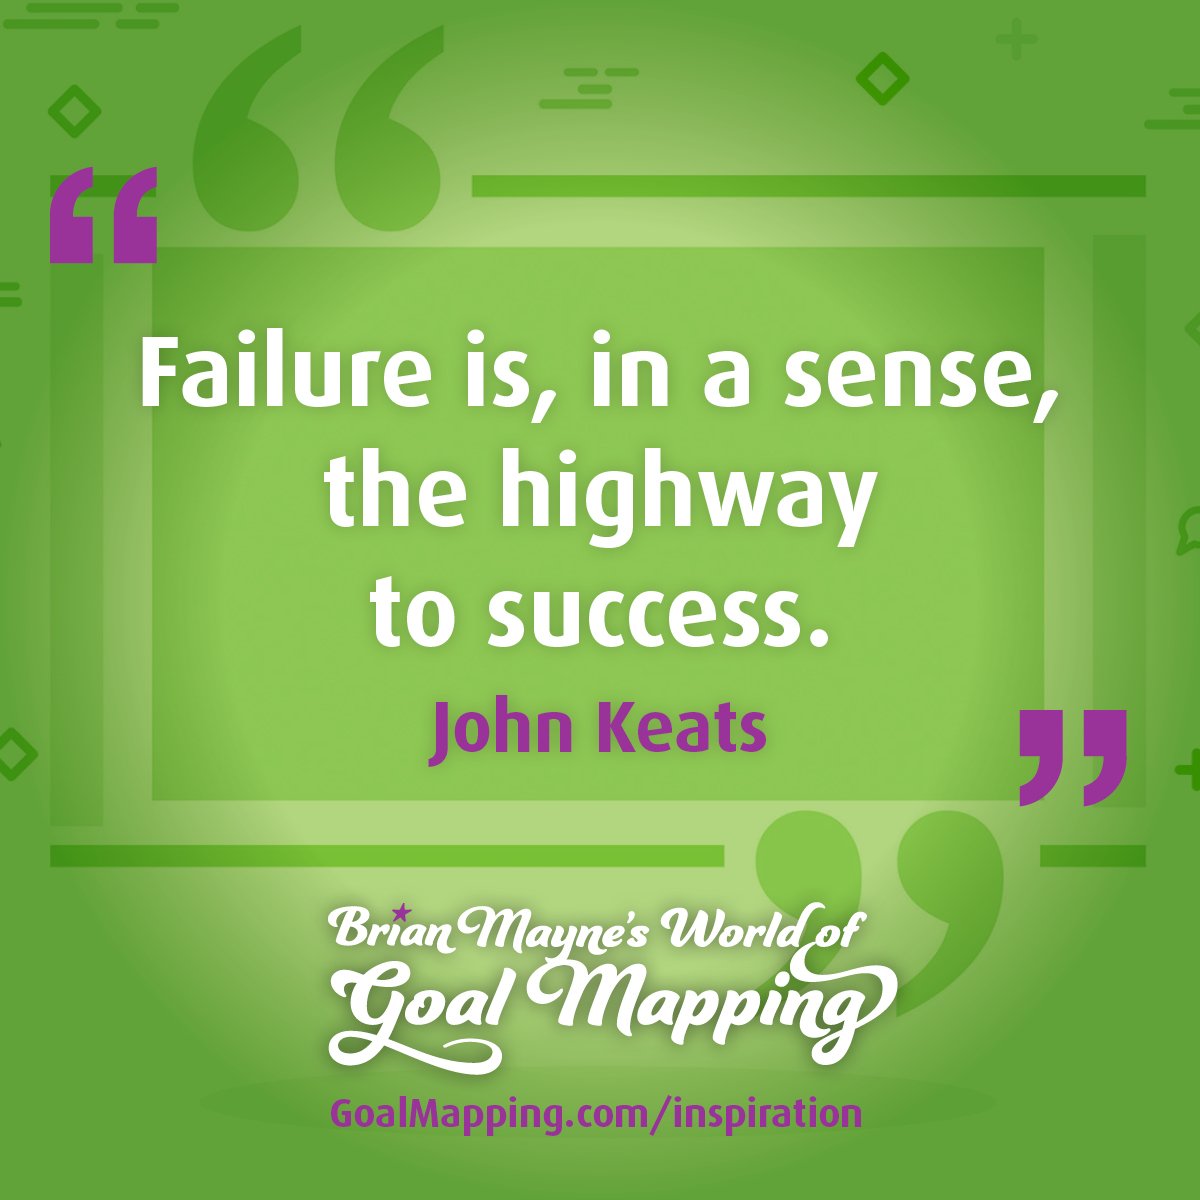 "Failure is, in a sense, the highway to success." John Keats